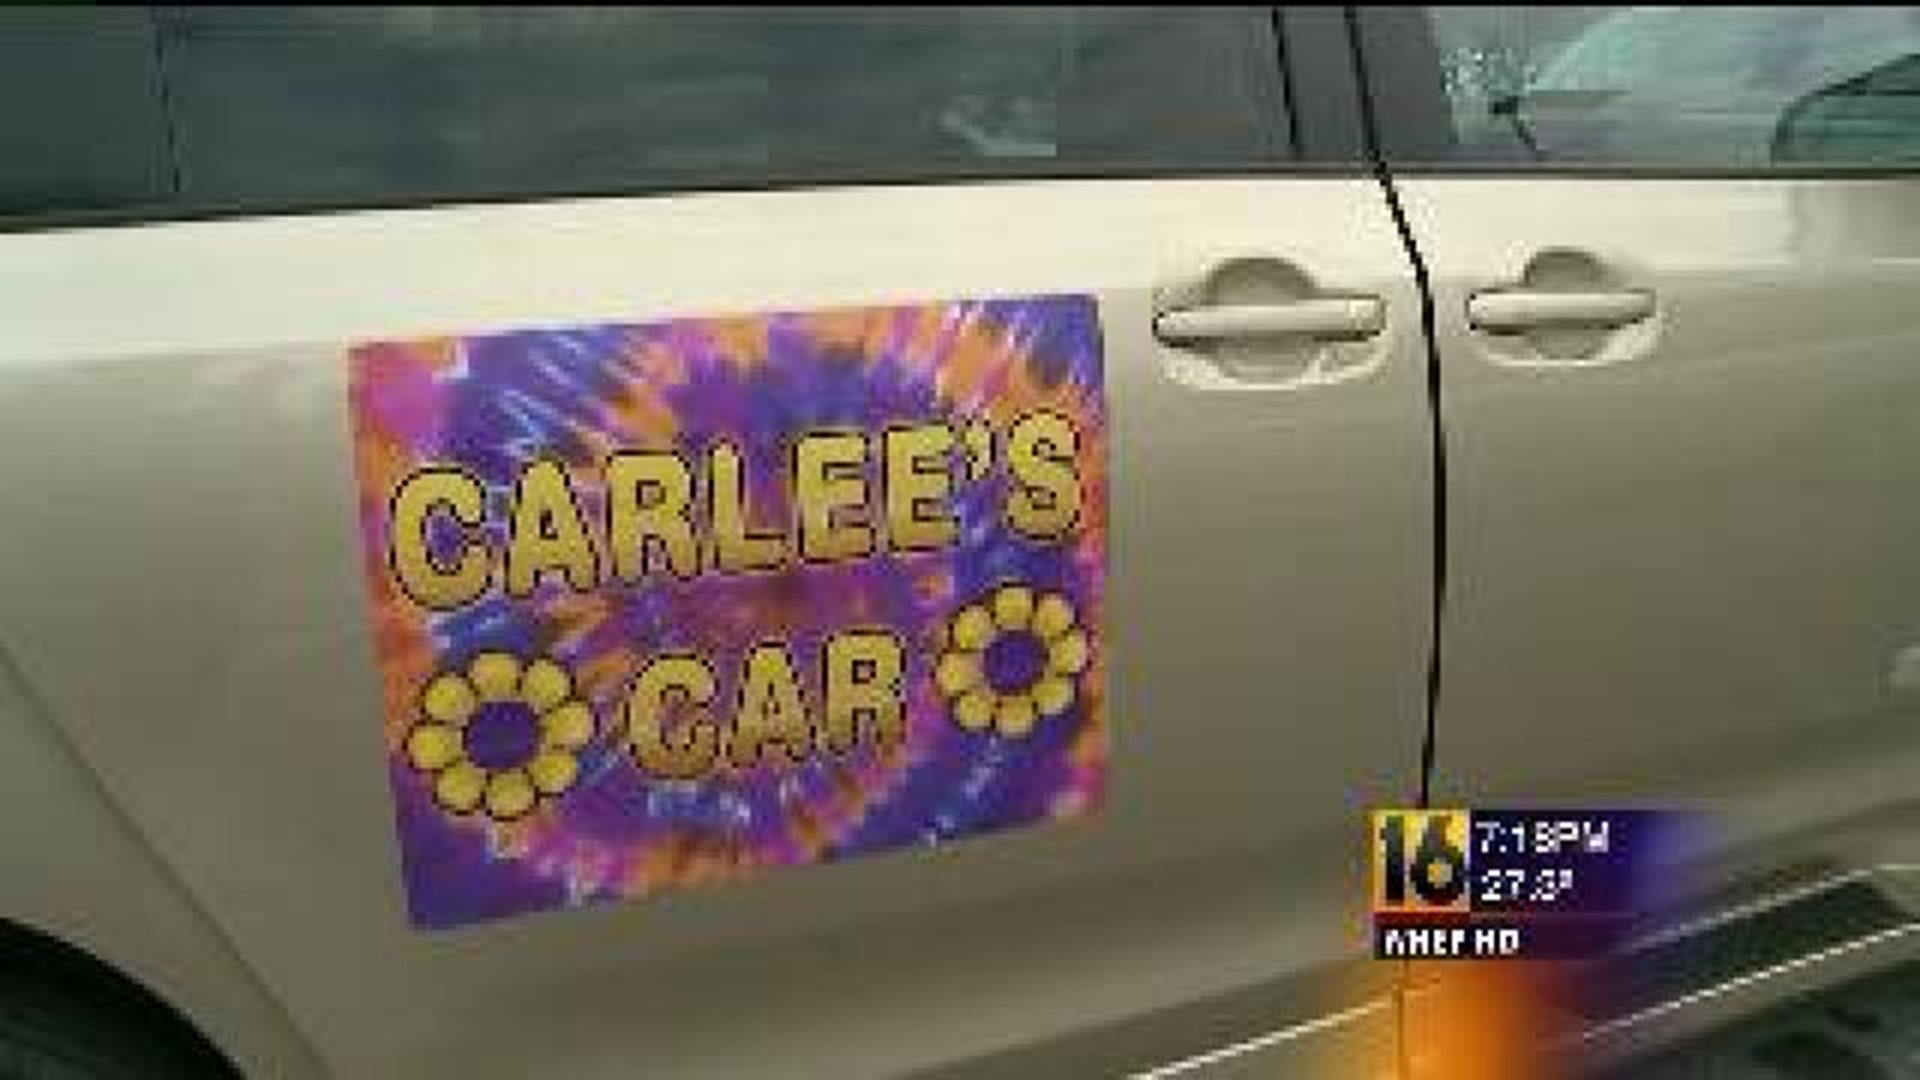 Carlee's Car: A Special Gift